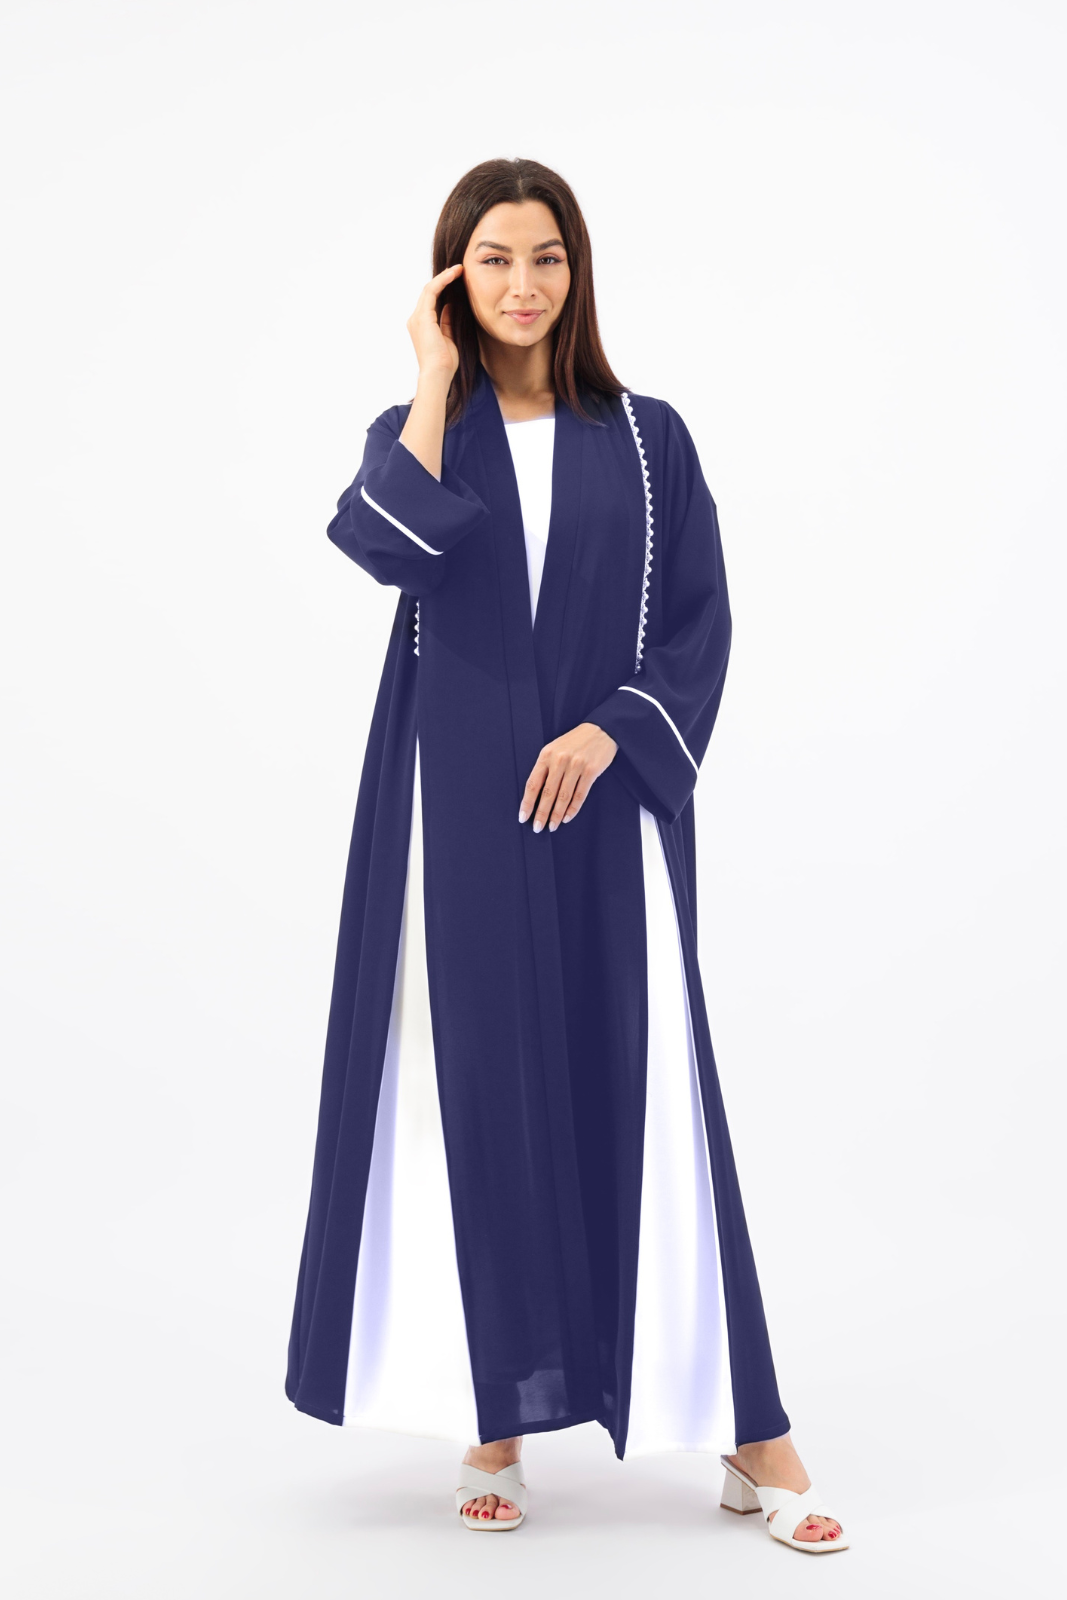 Contrast box pleated Abaya with Pearl piping details